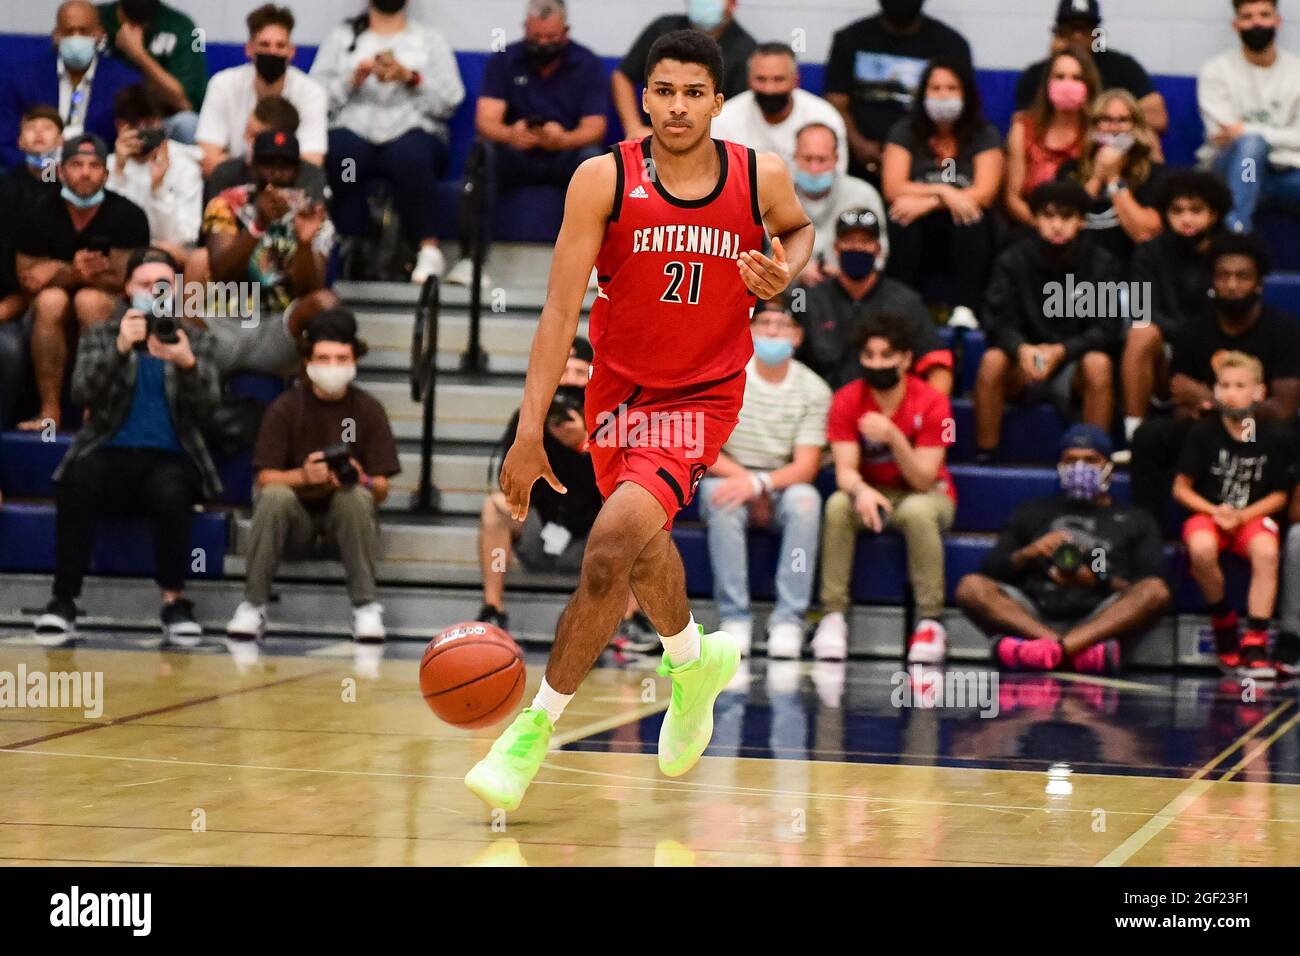 Centennial Huskies forward Aaron McBride (21) during the 2021 CIF Southern Section Championship basketball game on Friday, June 11, 2021, in Chatswort Stock Photo